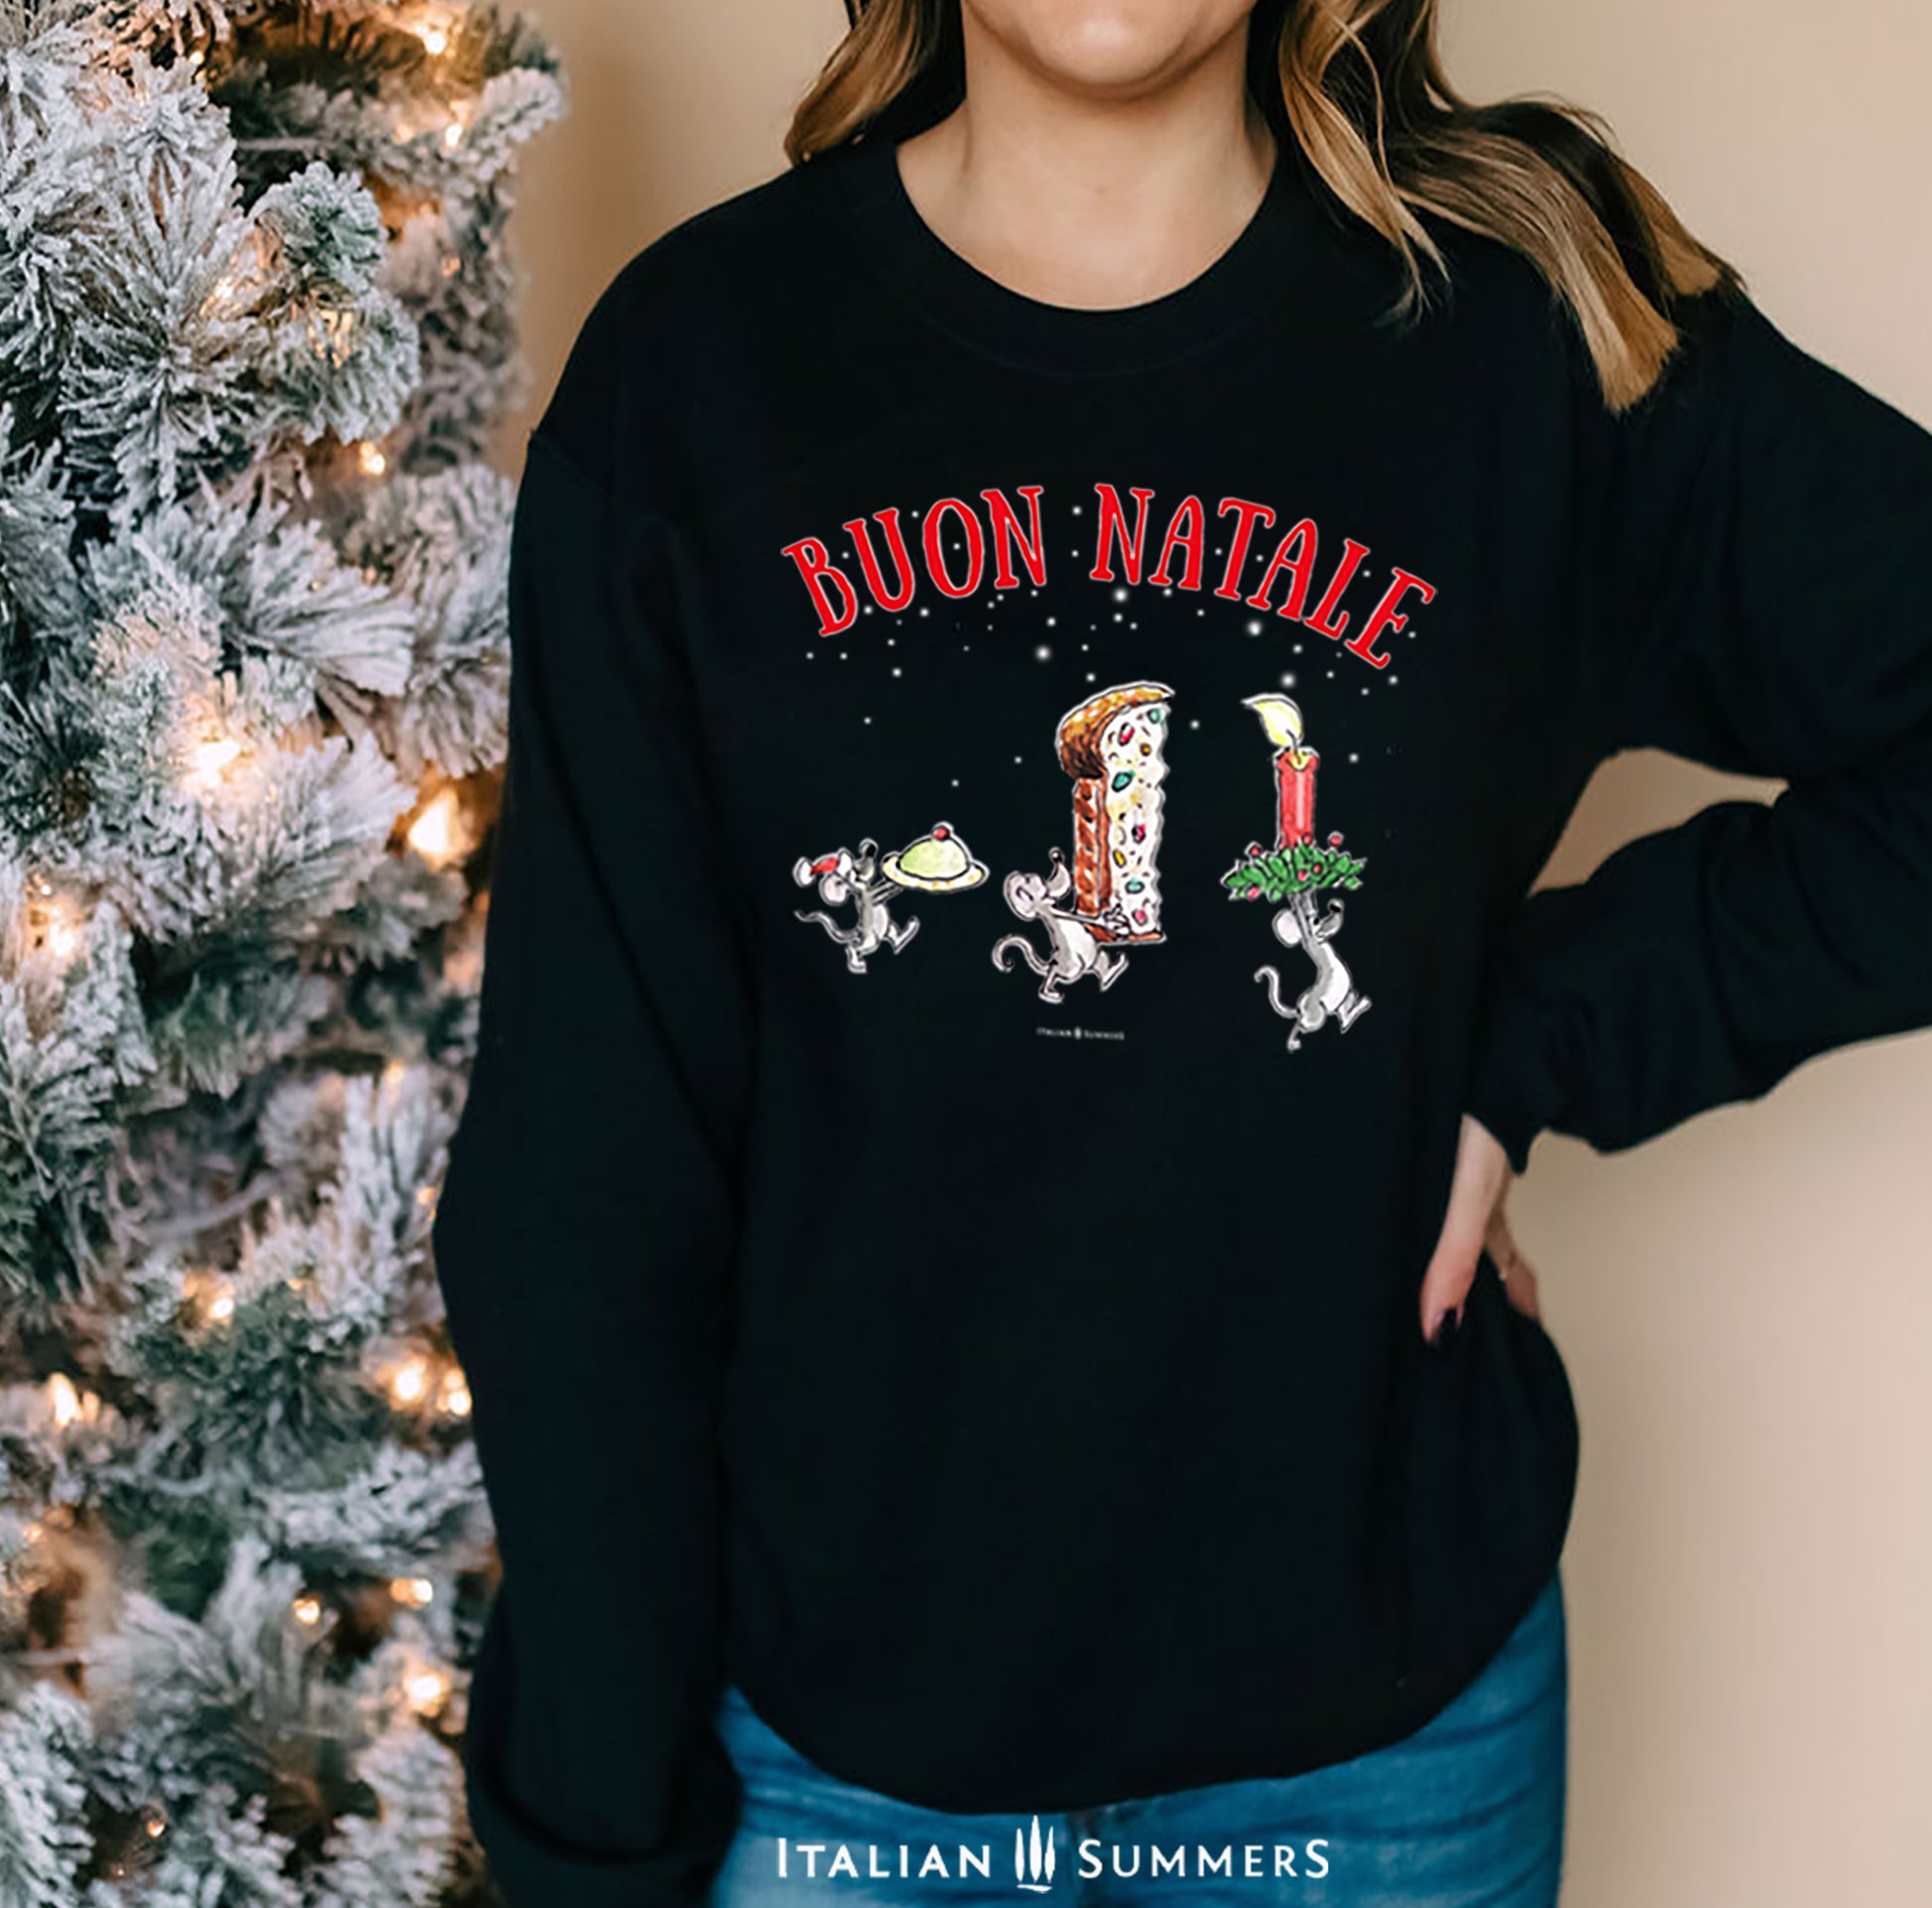 An Italy-inspired Christmas sweatshirt! Three Merry Italian Mice prance back to their cubby-hole to enjoy a Sicilian Cassatina and a slice of Panettone. This happy Italy-inspired Christmas sweatshirt is cozy and soft.